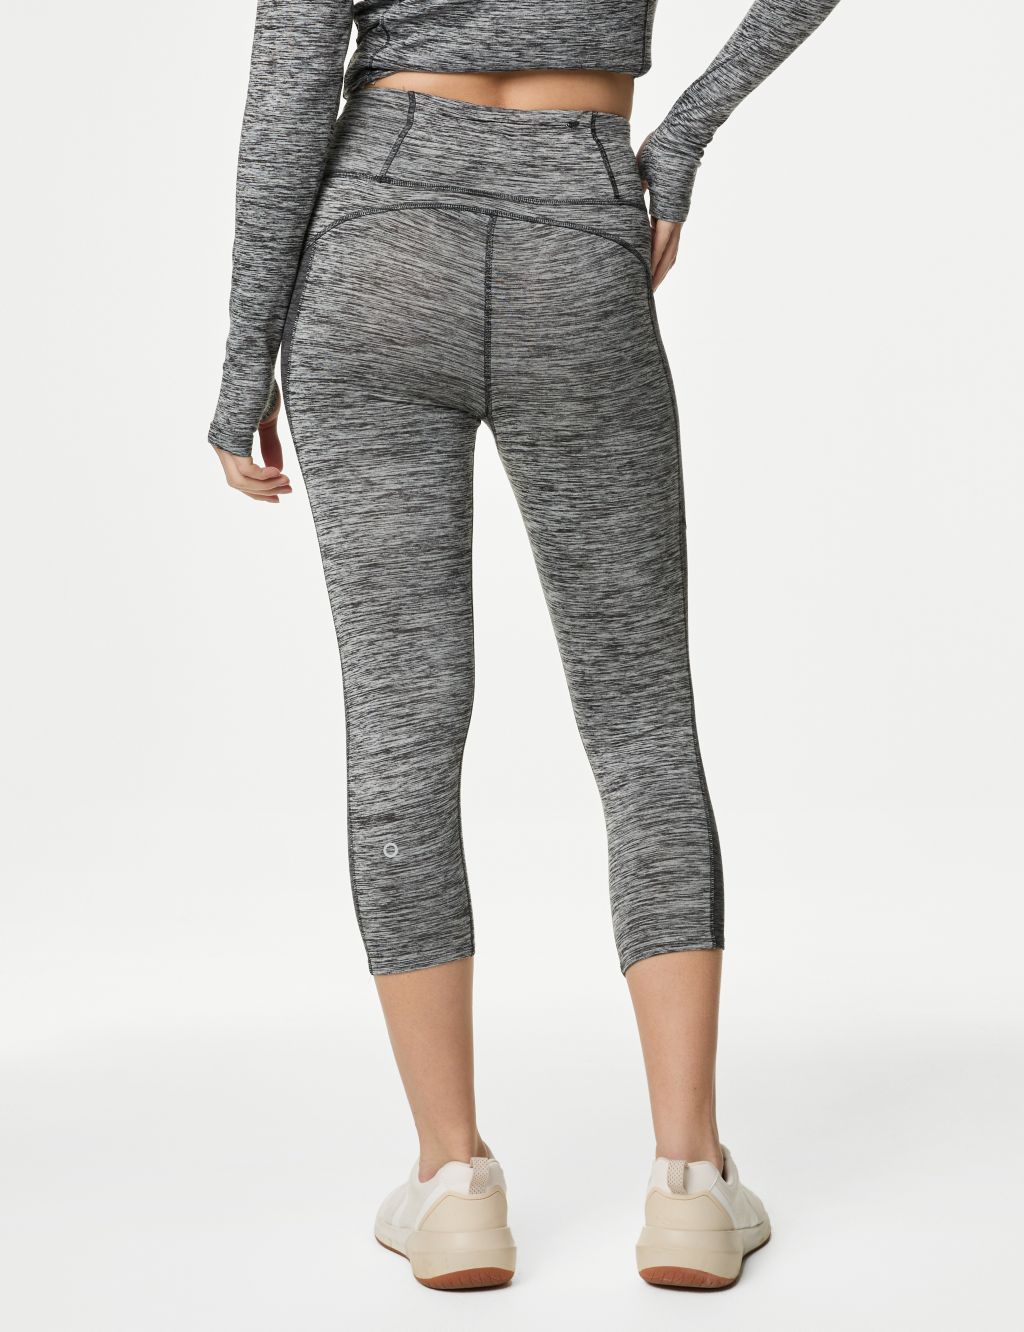 Go Move High Waisted Cropped Gym Leggings image 4